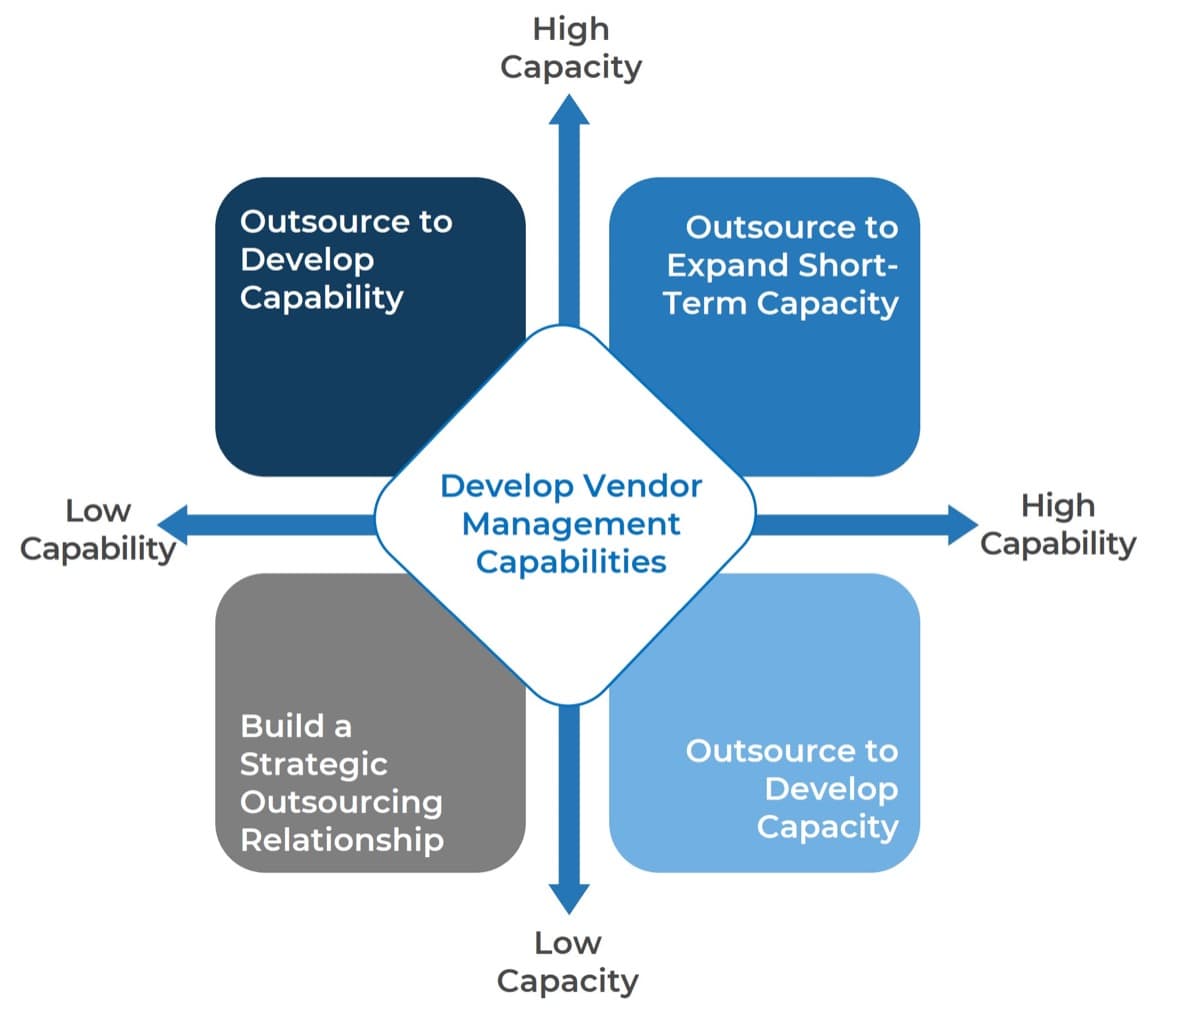 The image contains a diagram to show the Develop Vendor Management Capabilities, as described in the text below.